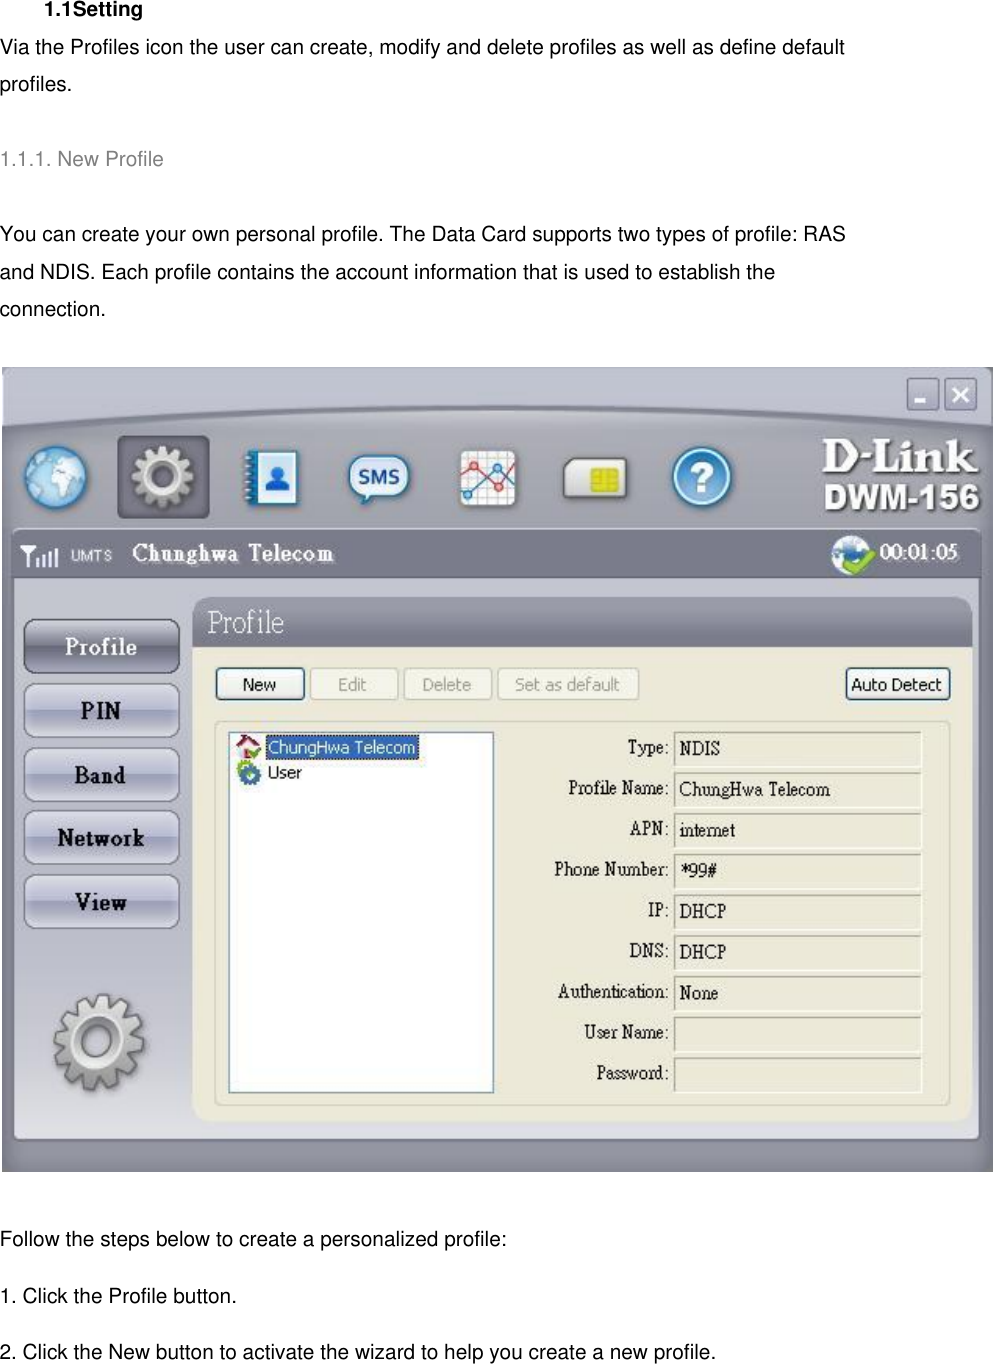  1.1Setting   Via the Profiles icon the user can create, modify and delete profiles as well as define default profiles.   1.1.1. New Profile   You can create your own personal profile. The Data Card supports two types of profile: RAS and NDIS. Each profile contains the account information that is used to establish the connection.  Follow the steps below to create a personalized profile: 1. Click the Profile button. 2. Click the New button to activate the wizard to help you create a new profile. 